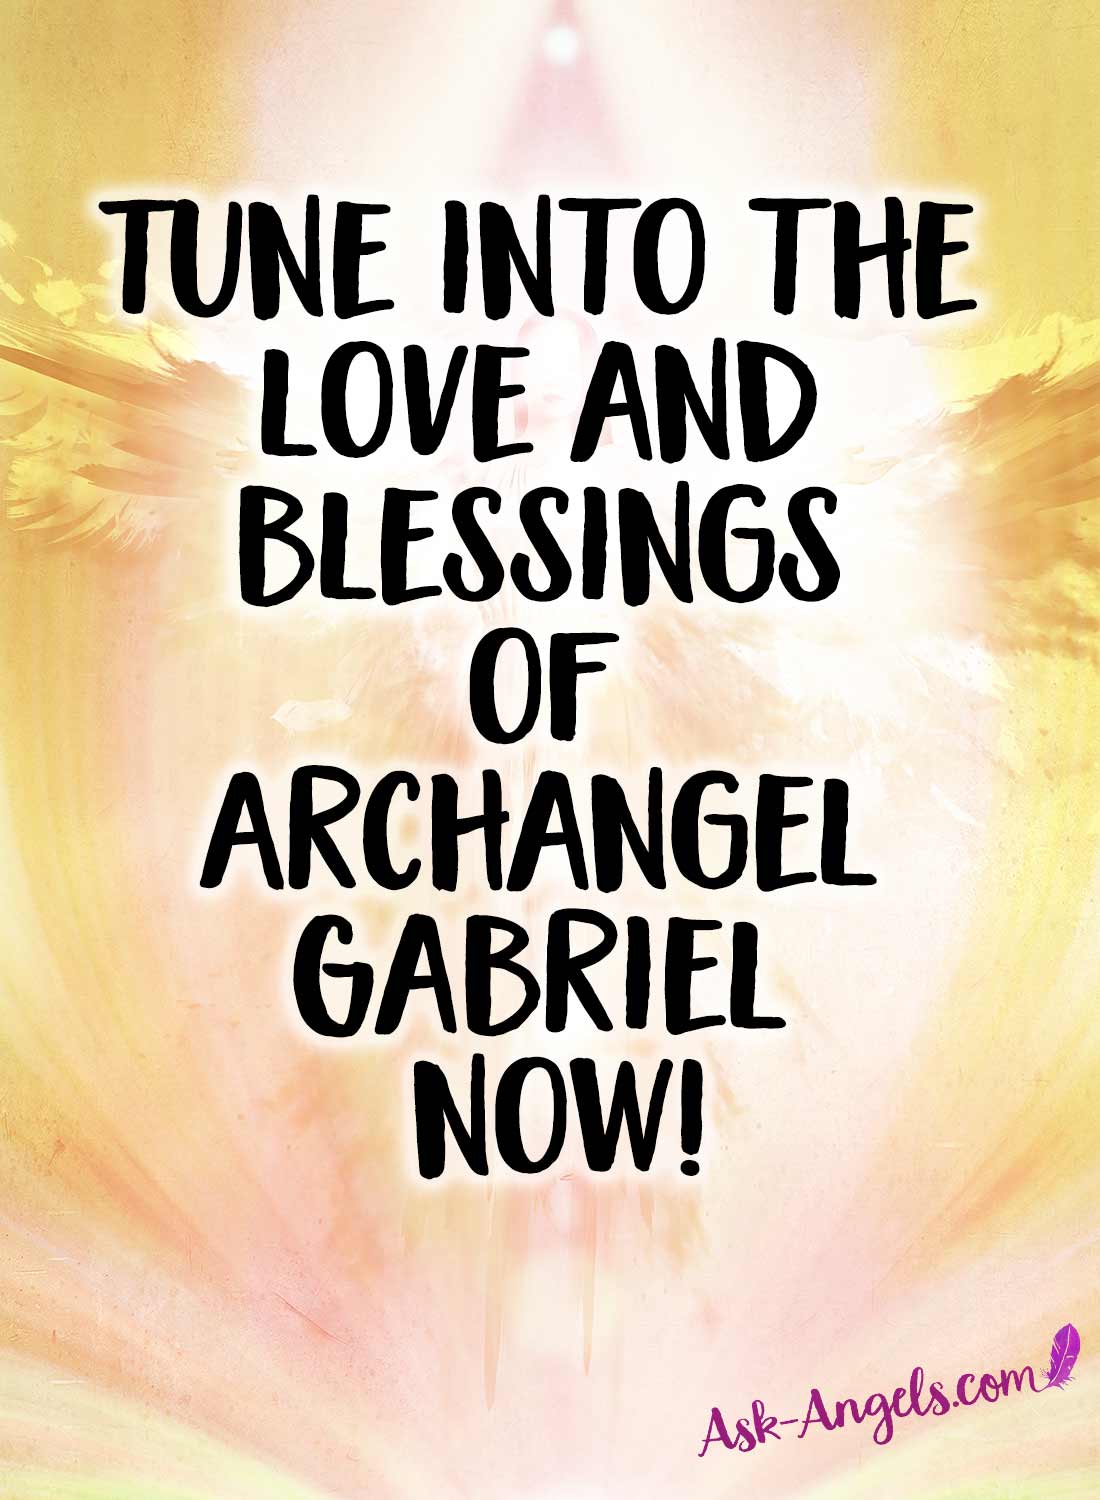 Tune into the love and blessings of the archangel of strength and communication.